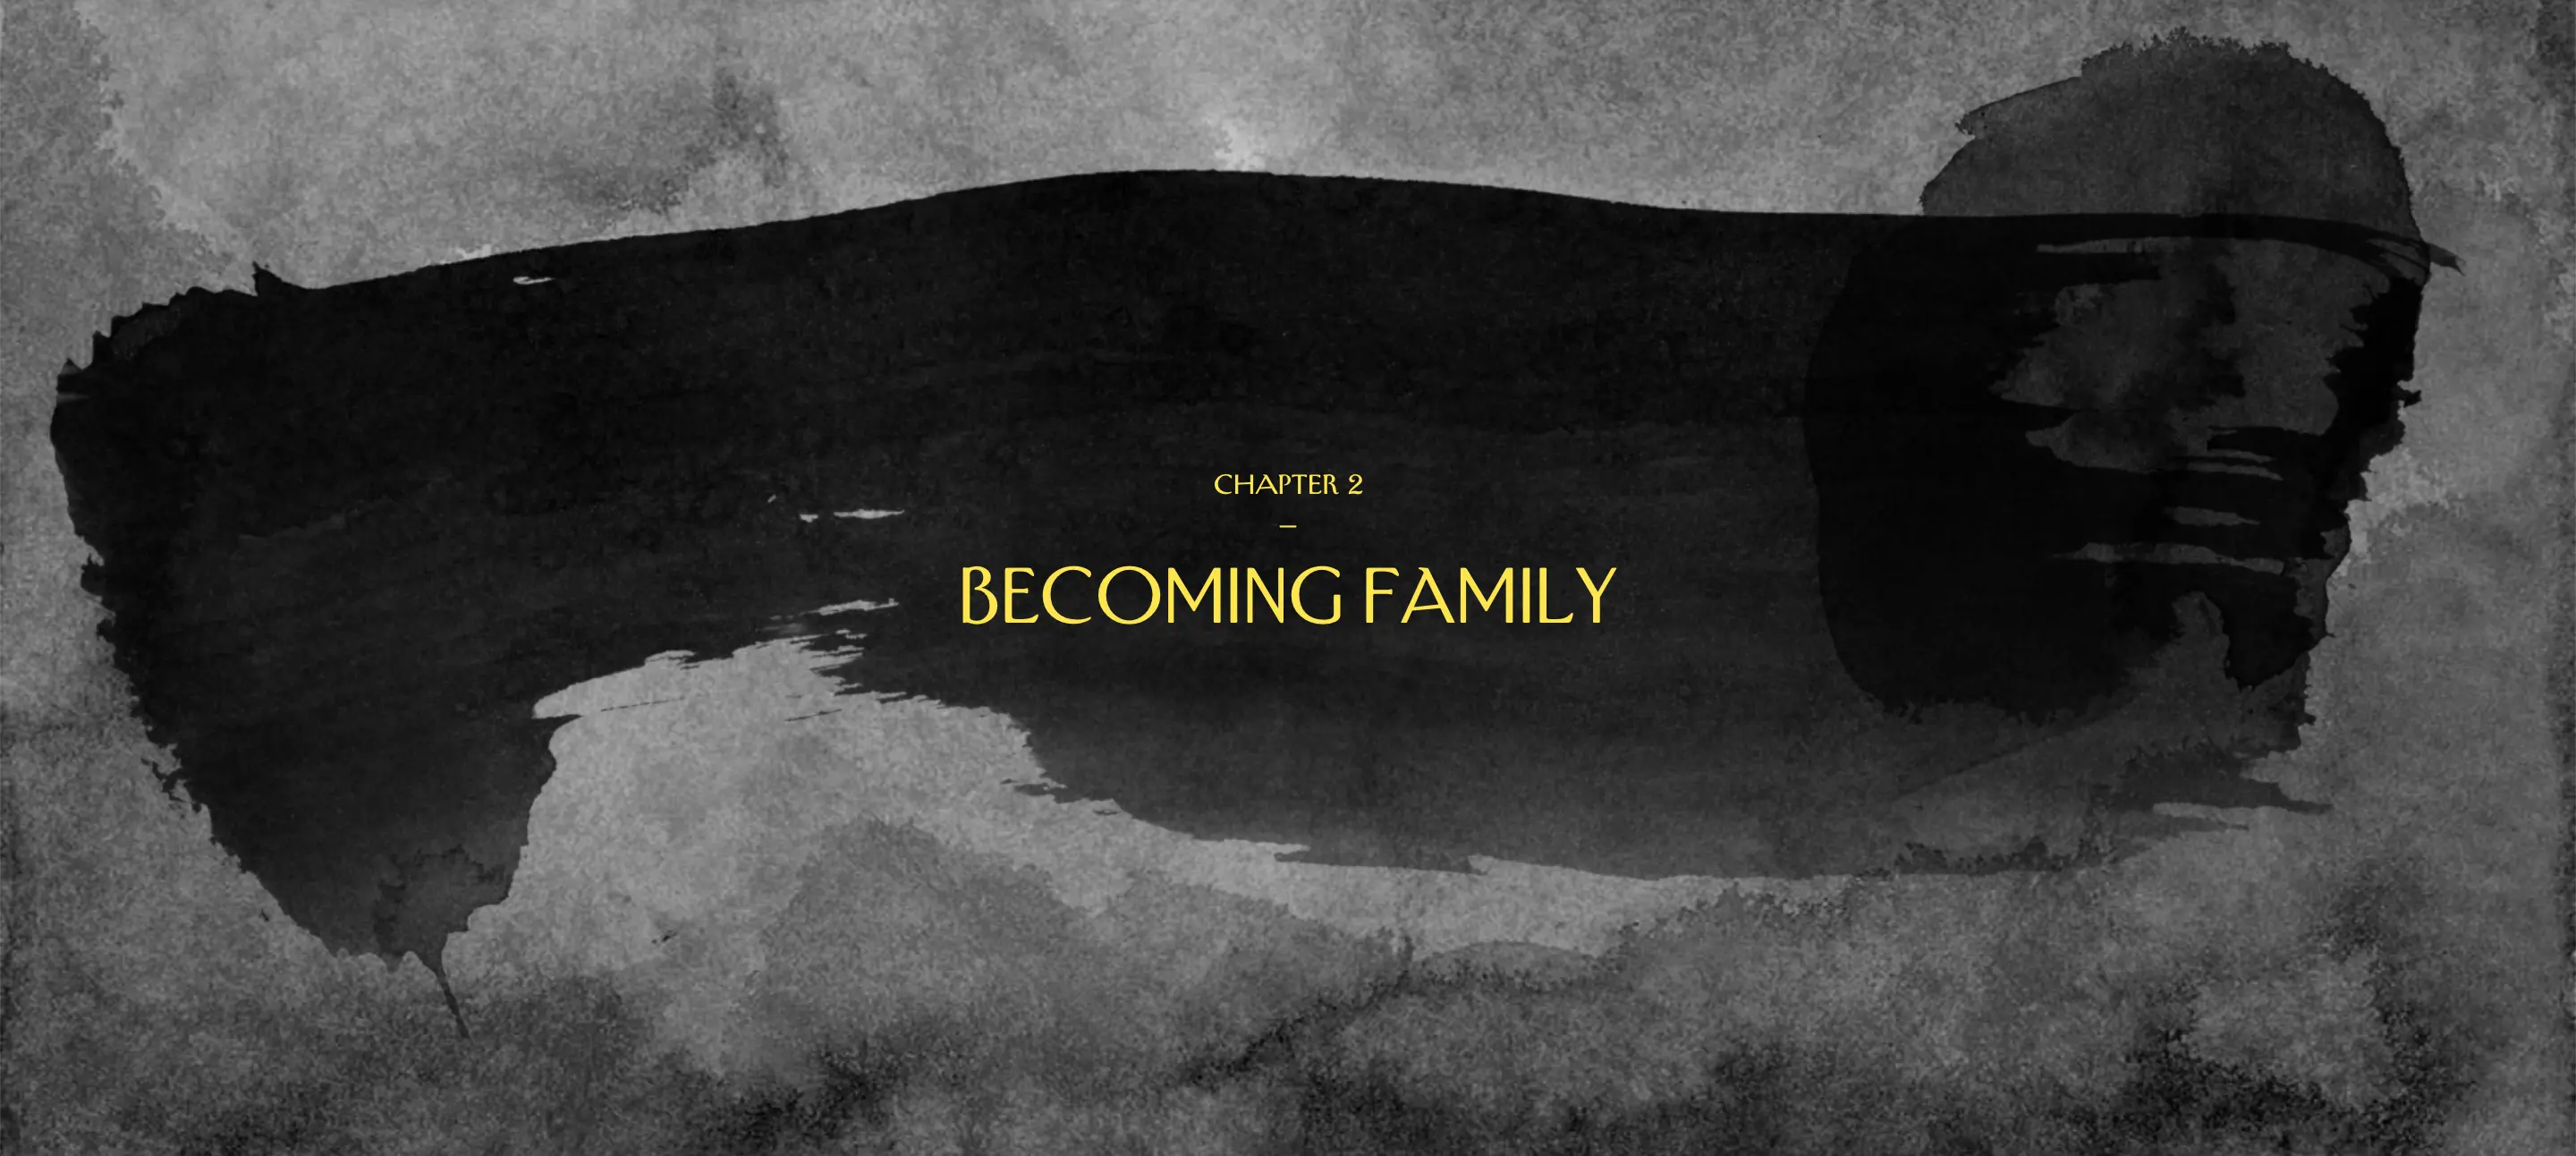 Chapter 2: Becoming Family